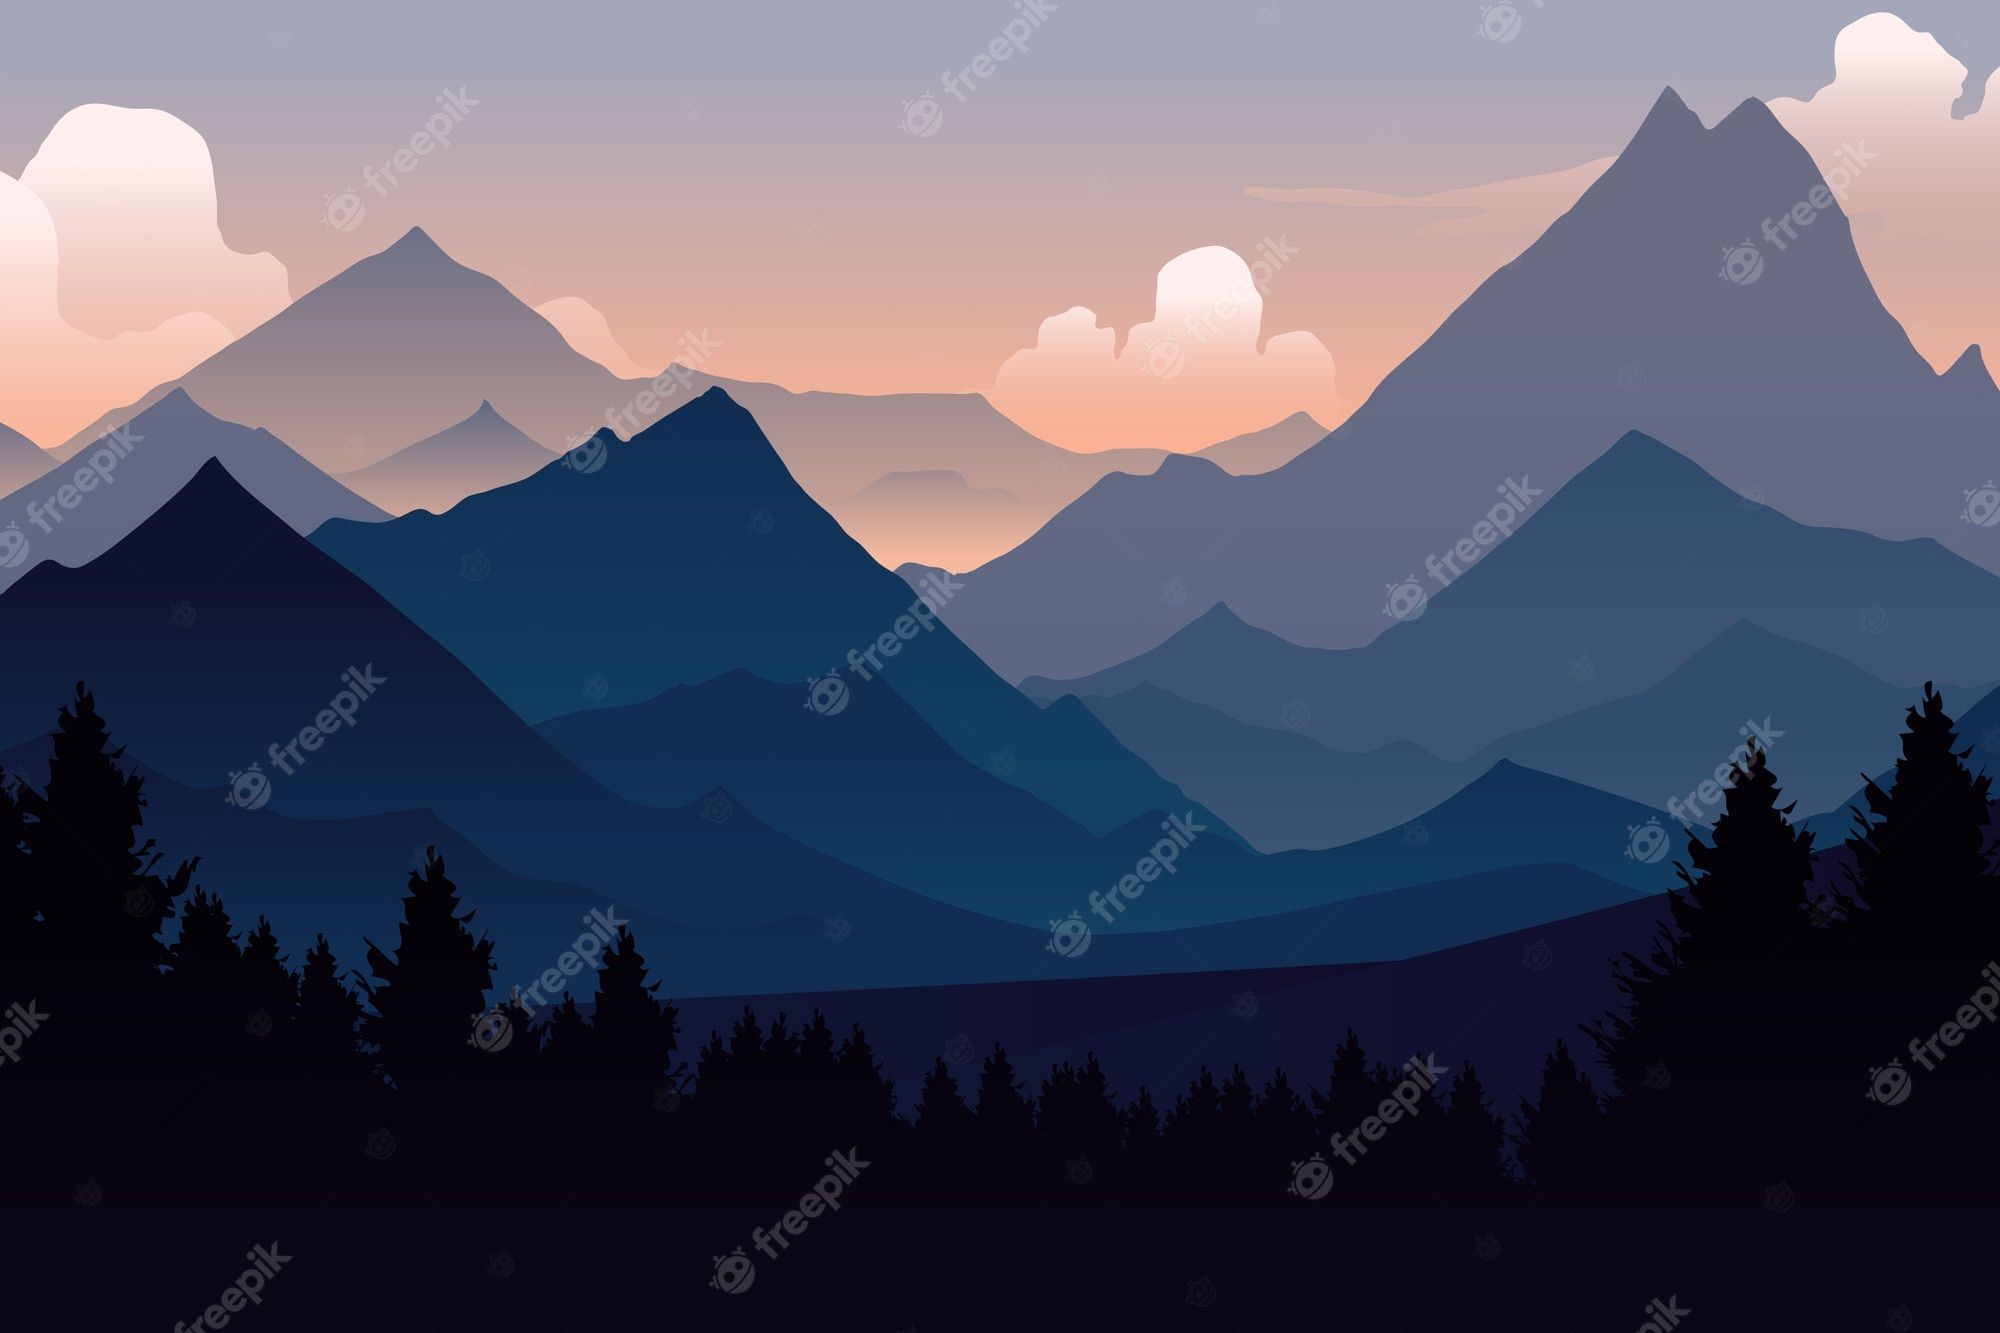 A mountain landscape with trees and clouds - Mountain